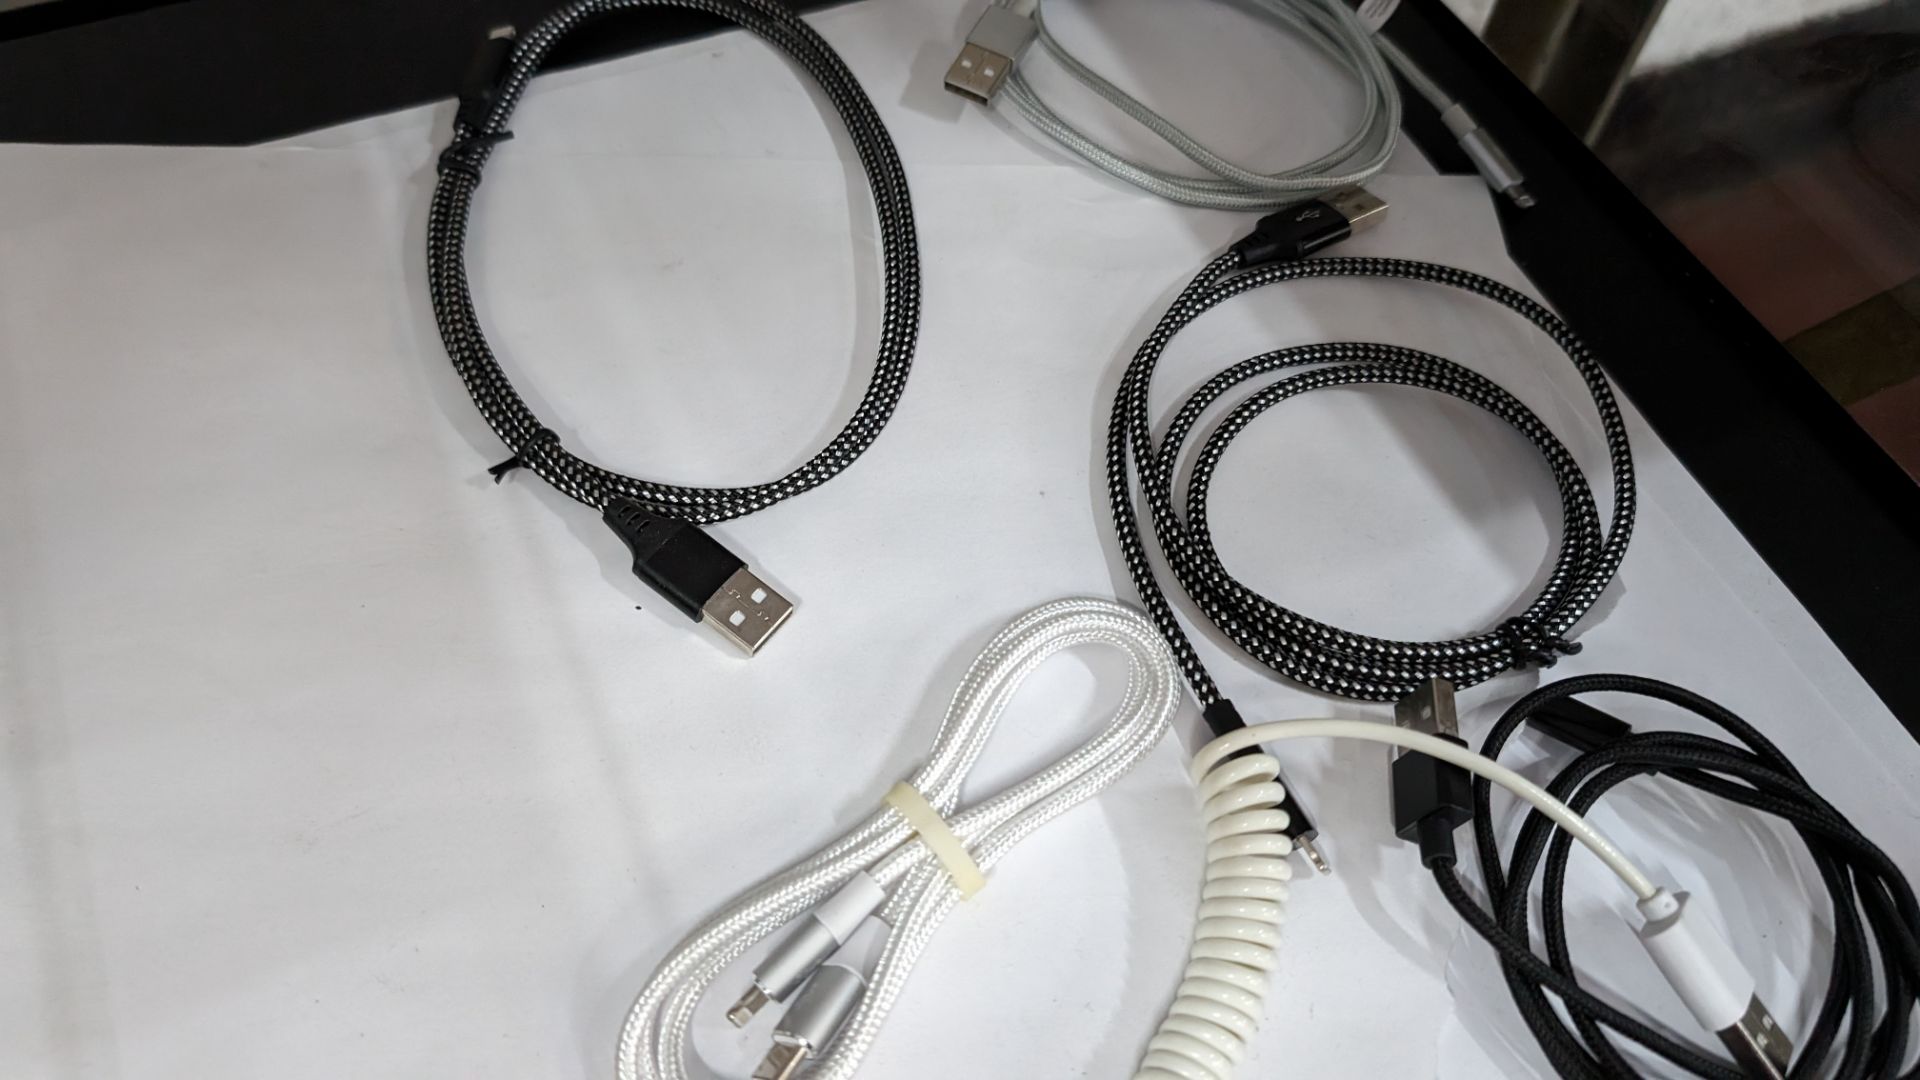 7 off assorted USB to lightning cables - Image 5 of 7